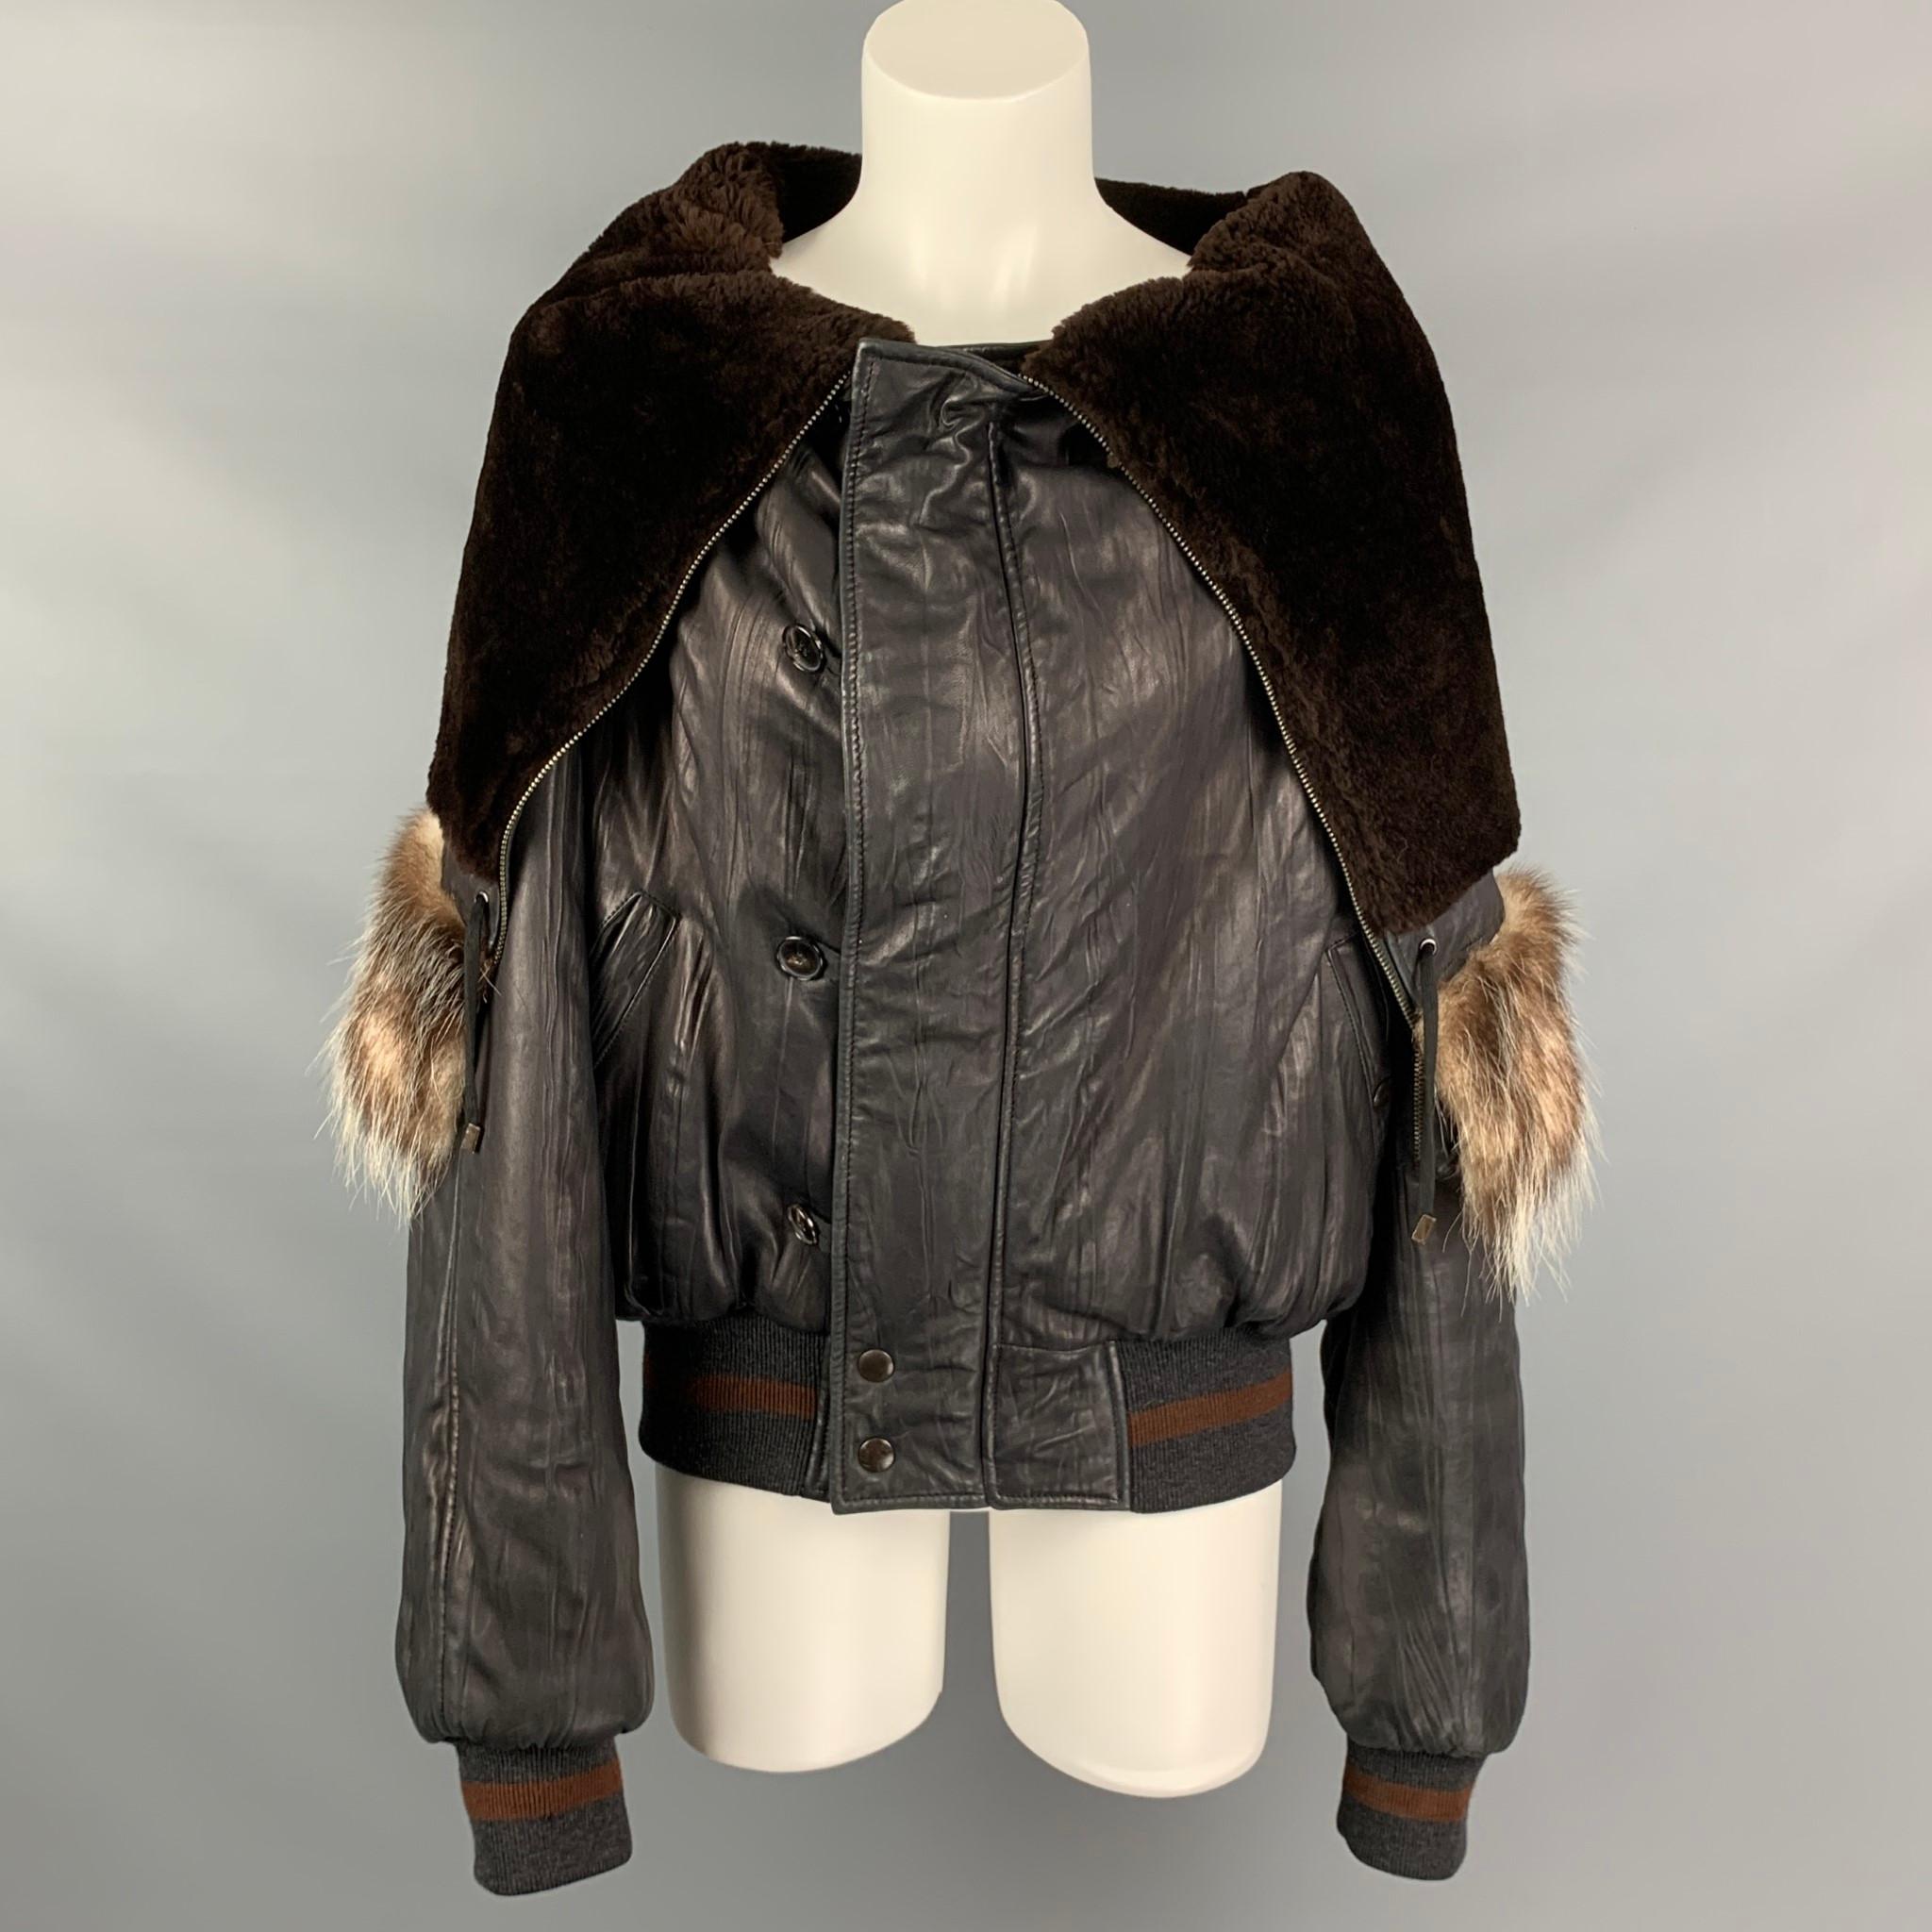 Vintage JEAN PAUL GAULTIER FEMME jacket comes in a black sheep skin leather featuring a turtleneck fur collar, ribbed hem, front pockets, sleeve pocket detail, and a zip & buttoned closure. Made in Italy.

Very Good Pre-Owned Condition.
Marked: Size